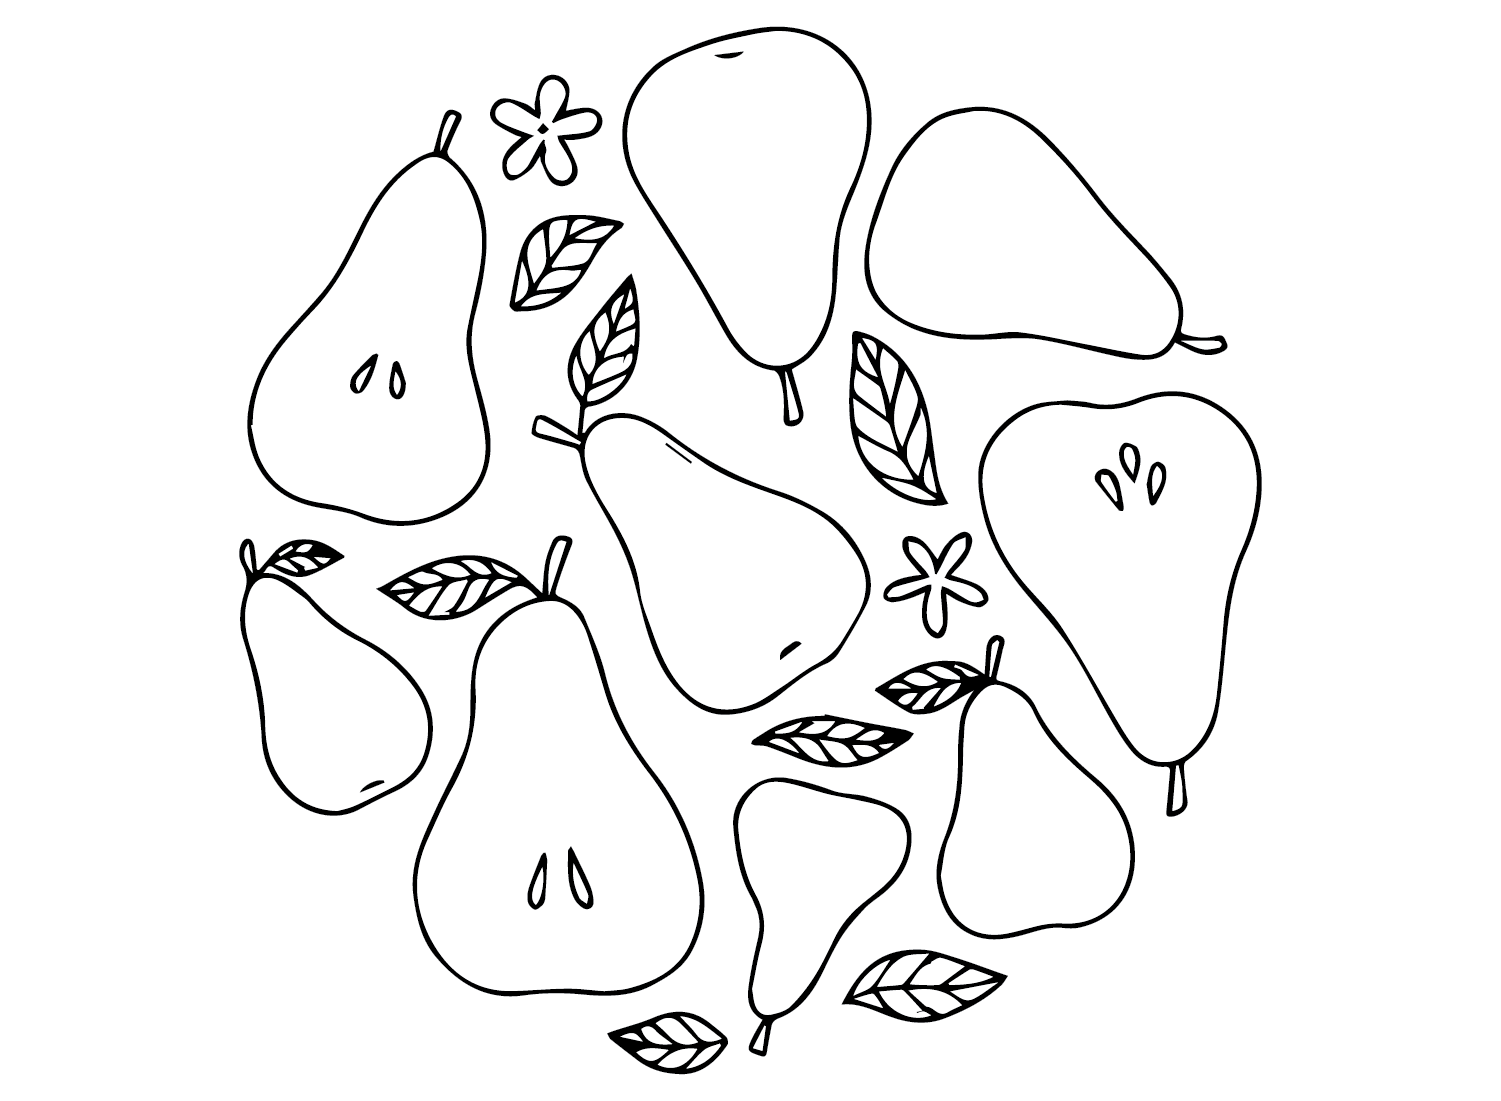 Pears Pattern from Pears